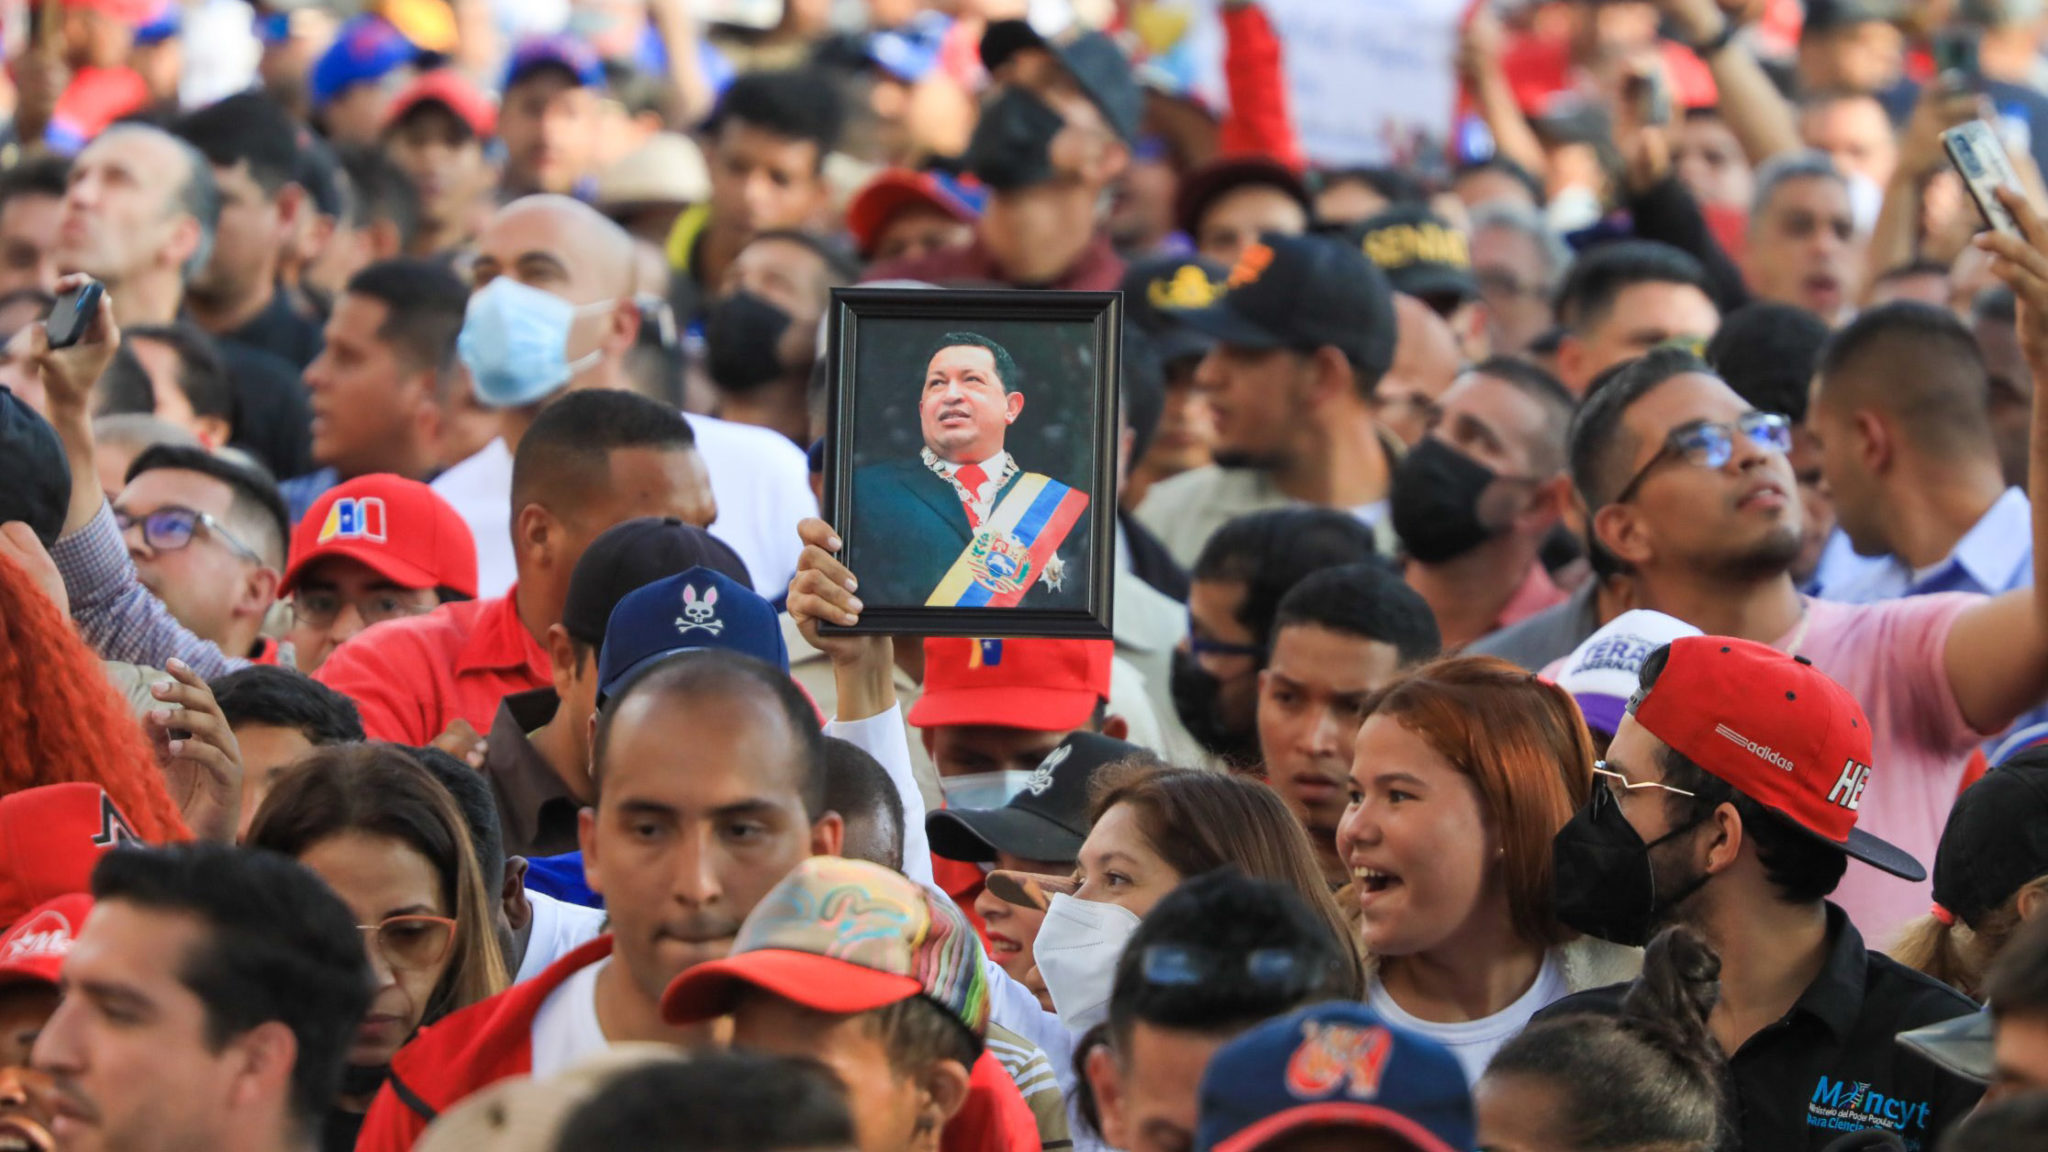 Those Who Die for Life – like Hugo Chávez – Cannot Be Called Dead